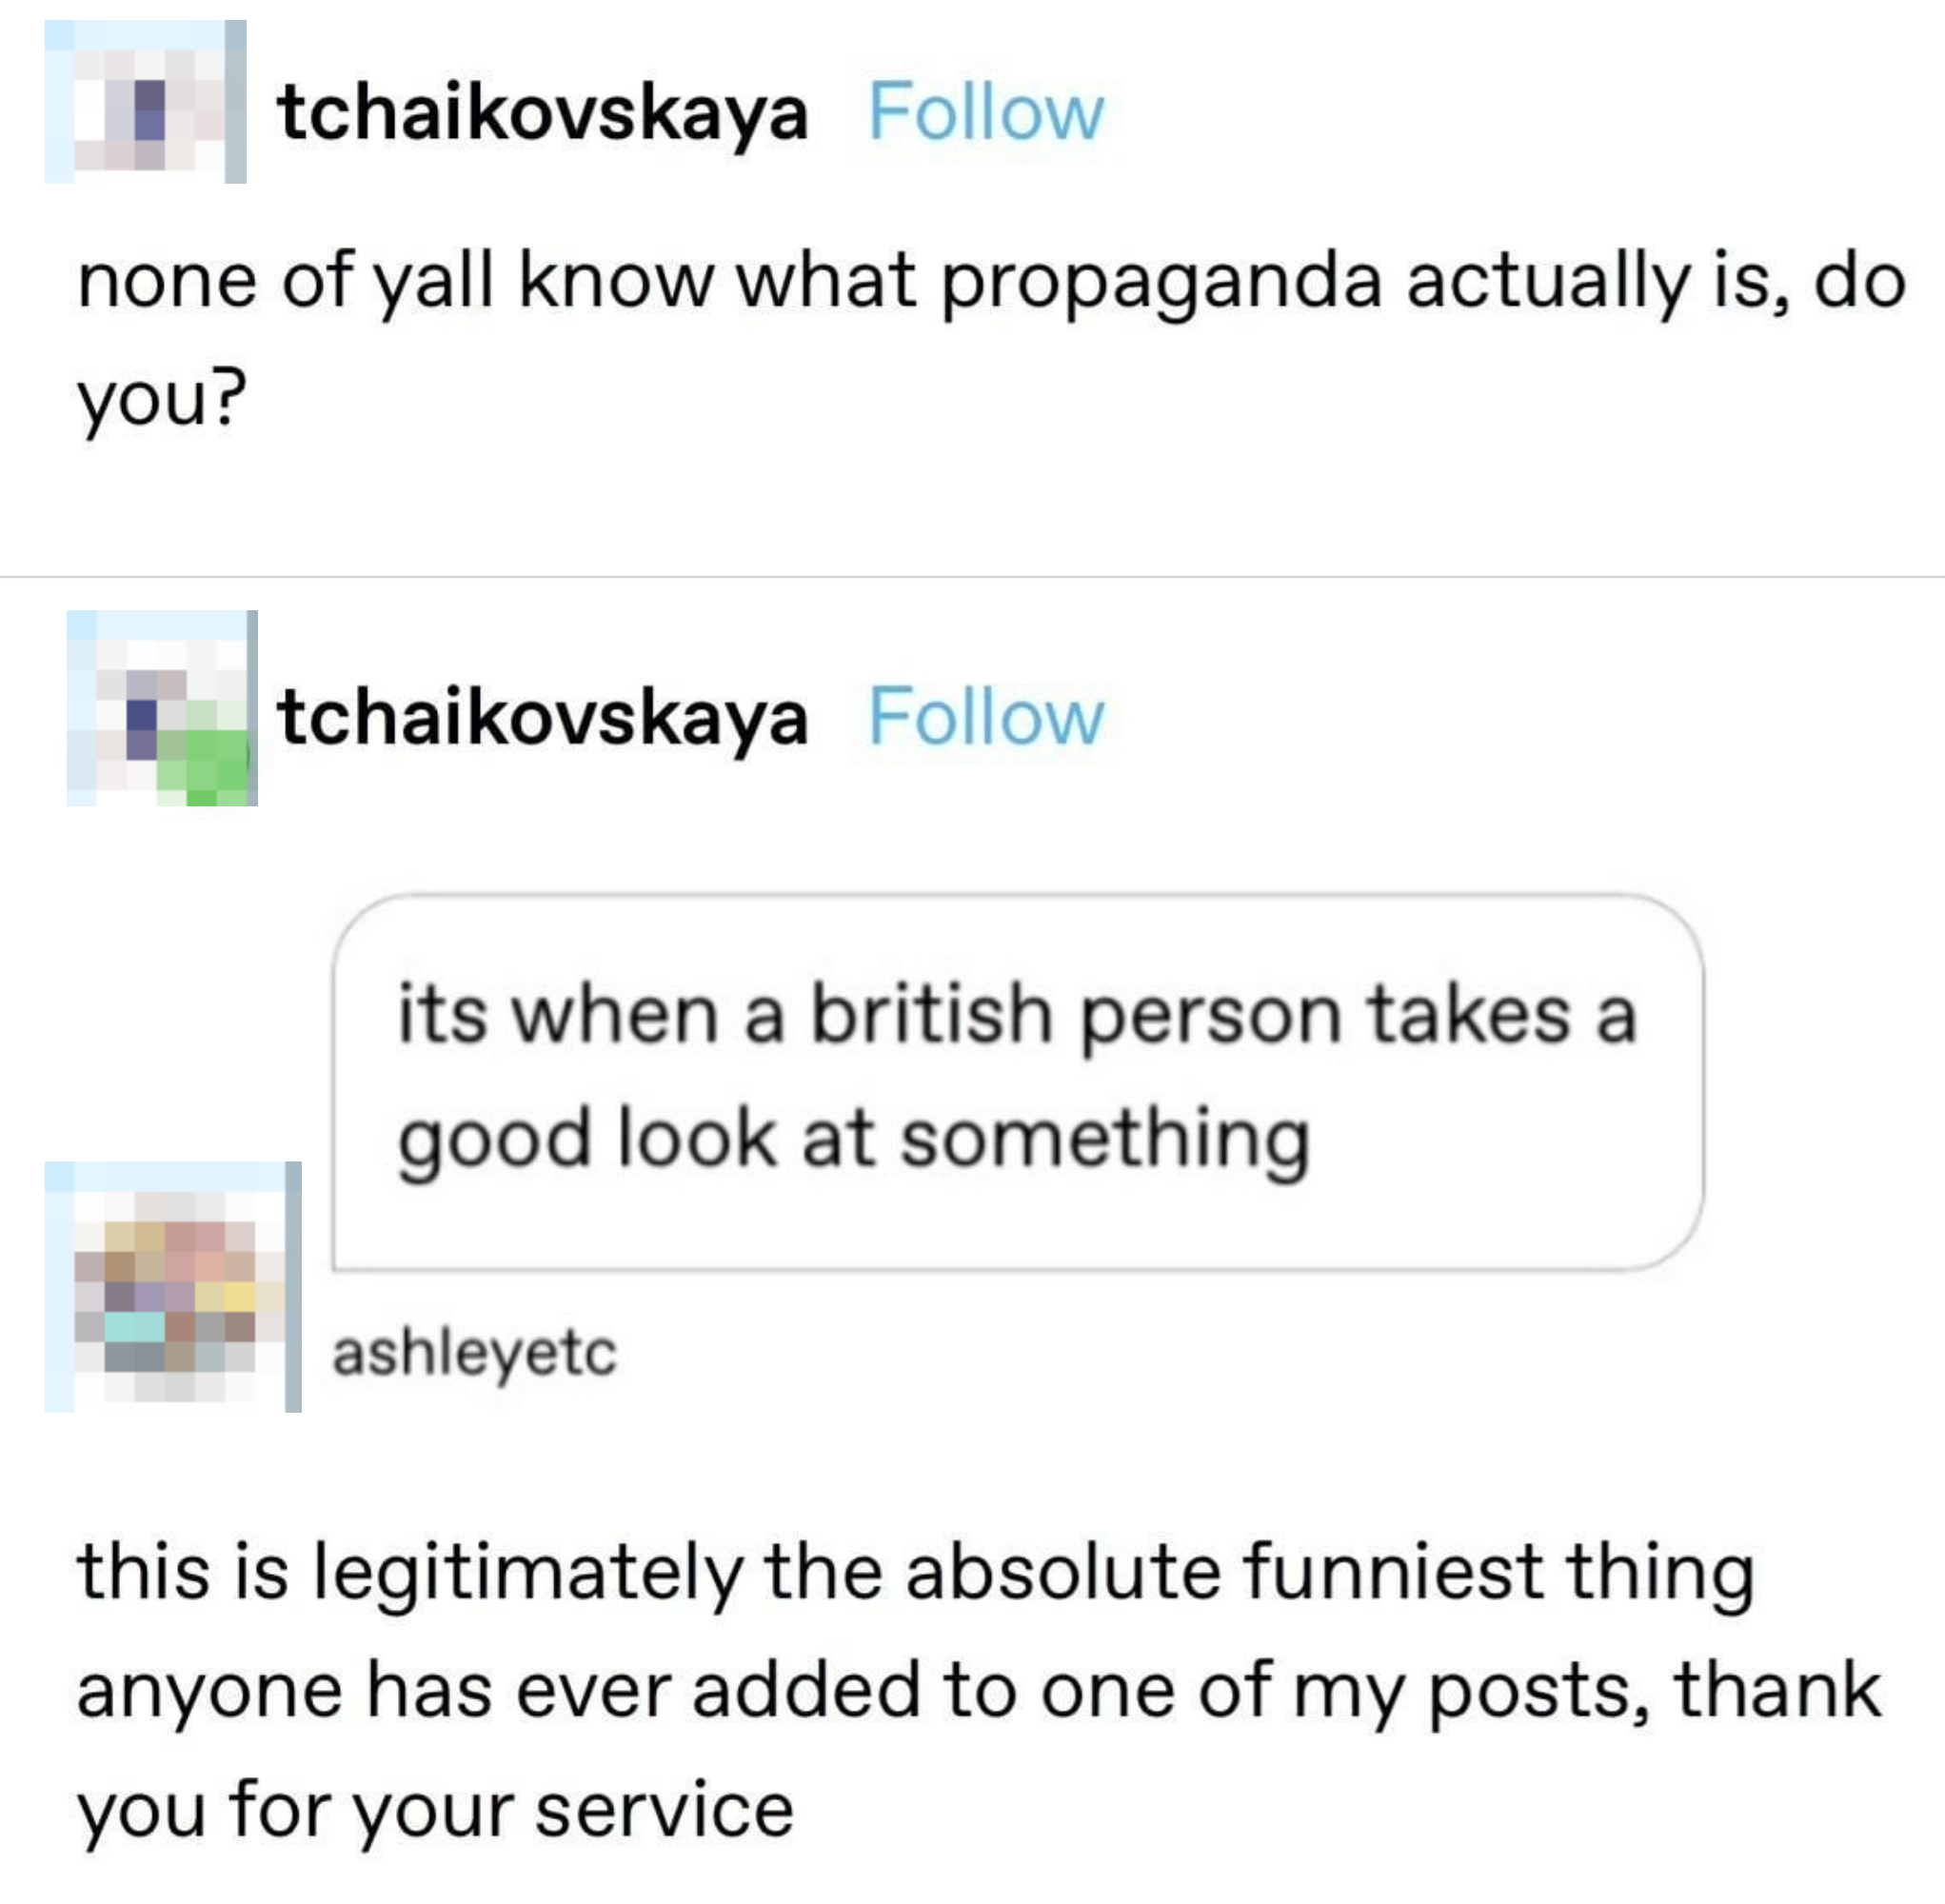 Two social media text posts joking that &#x27;propaganda&#x27; means a British person taking a good look